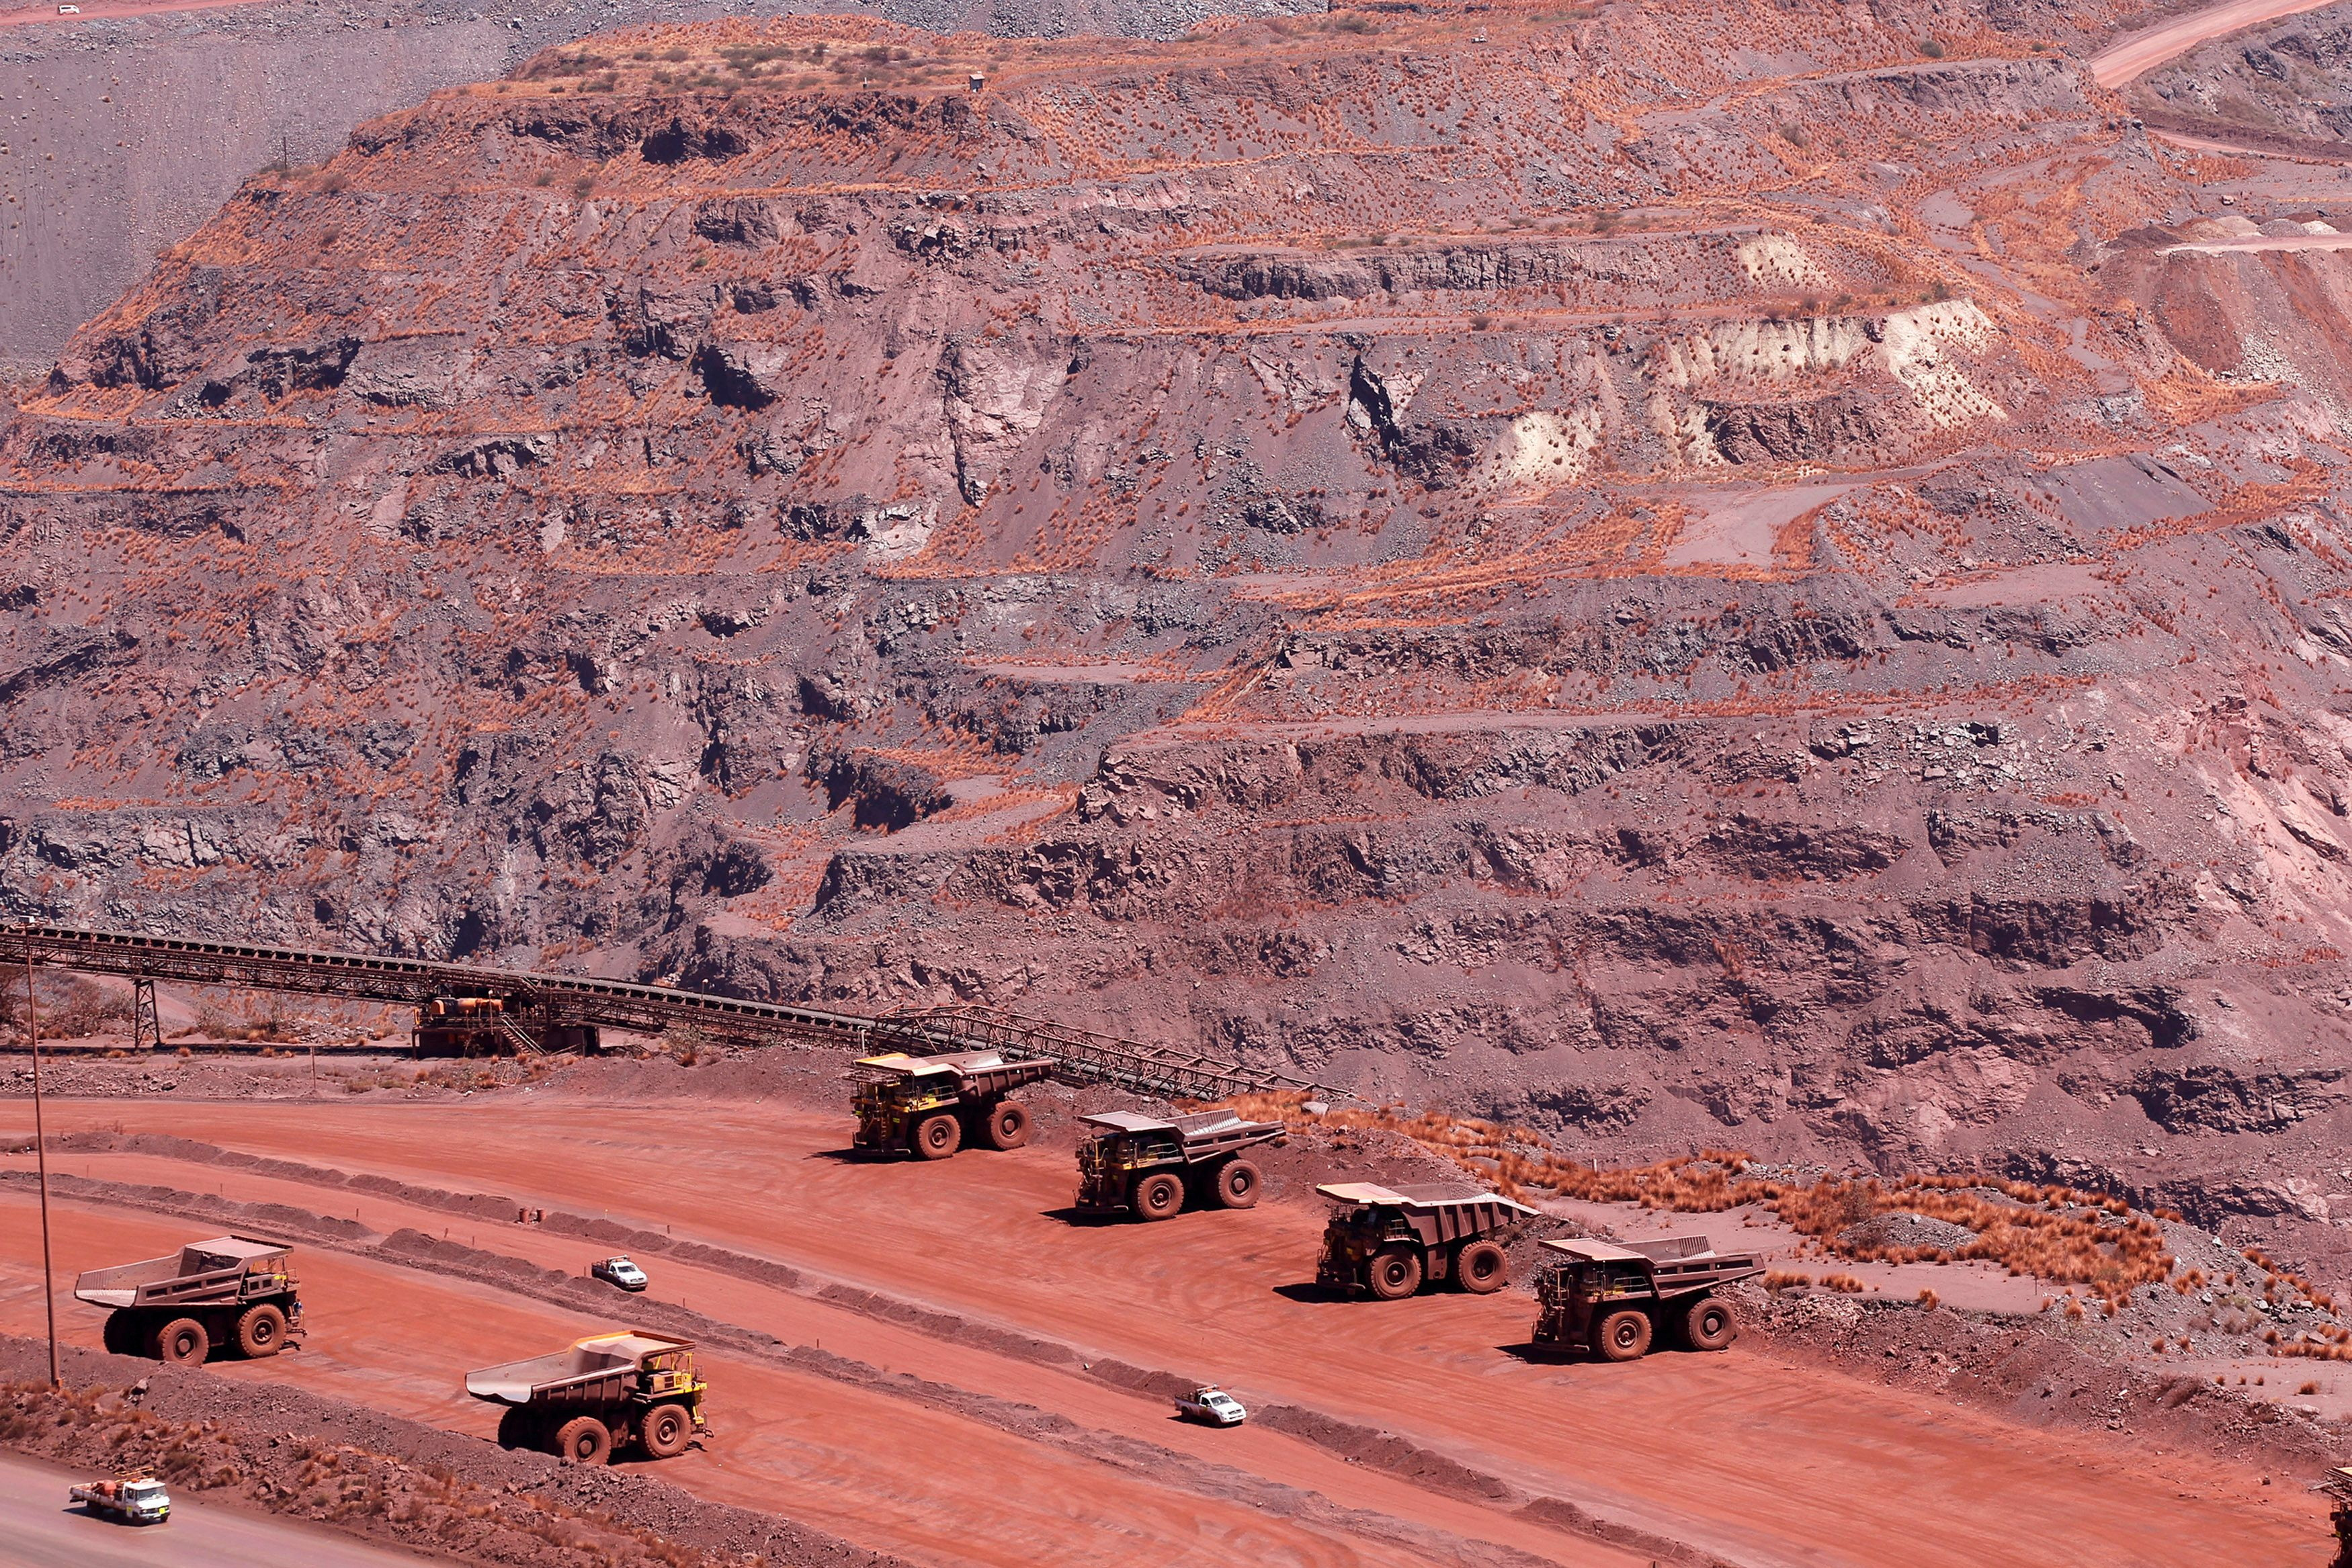 Haul trucks are seen at Kumba Iron Ore, the world's largest iron ore mines in Khathu, Northern Cape province, South Africa